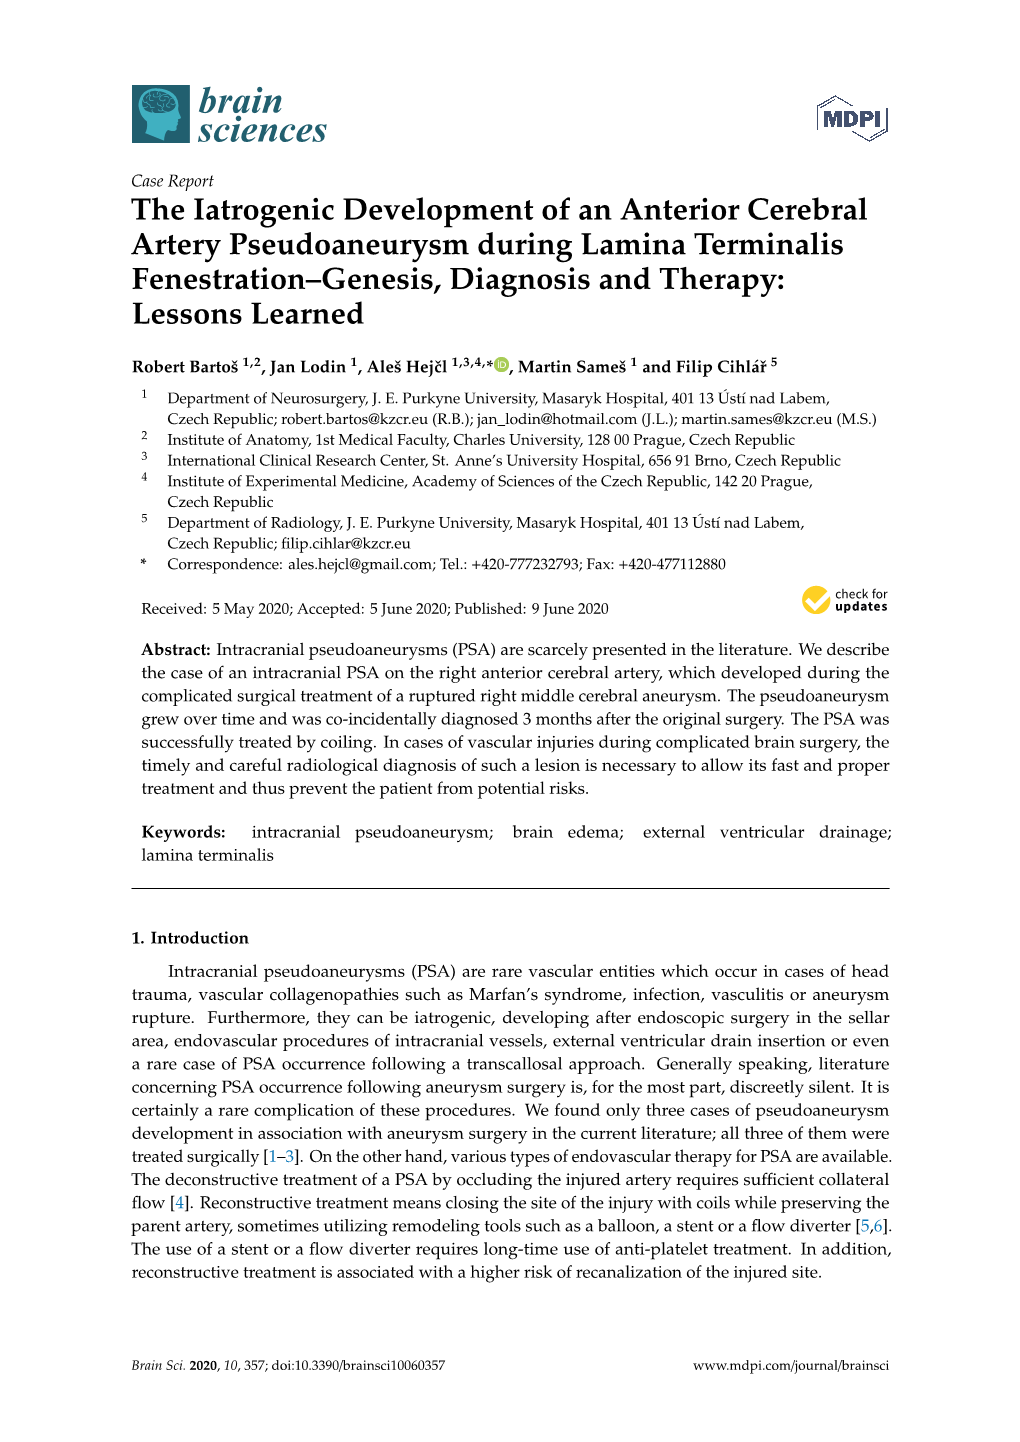 The Iatrogenic Development of an Anterior Cerebral Artery Pseudoaneurysm During Lamina Terminalis Fenestration–Genesis, Diagnosis and Therapy: Lessons Learned